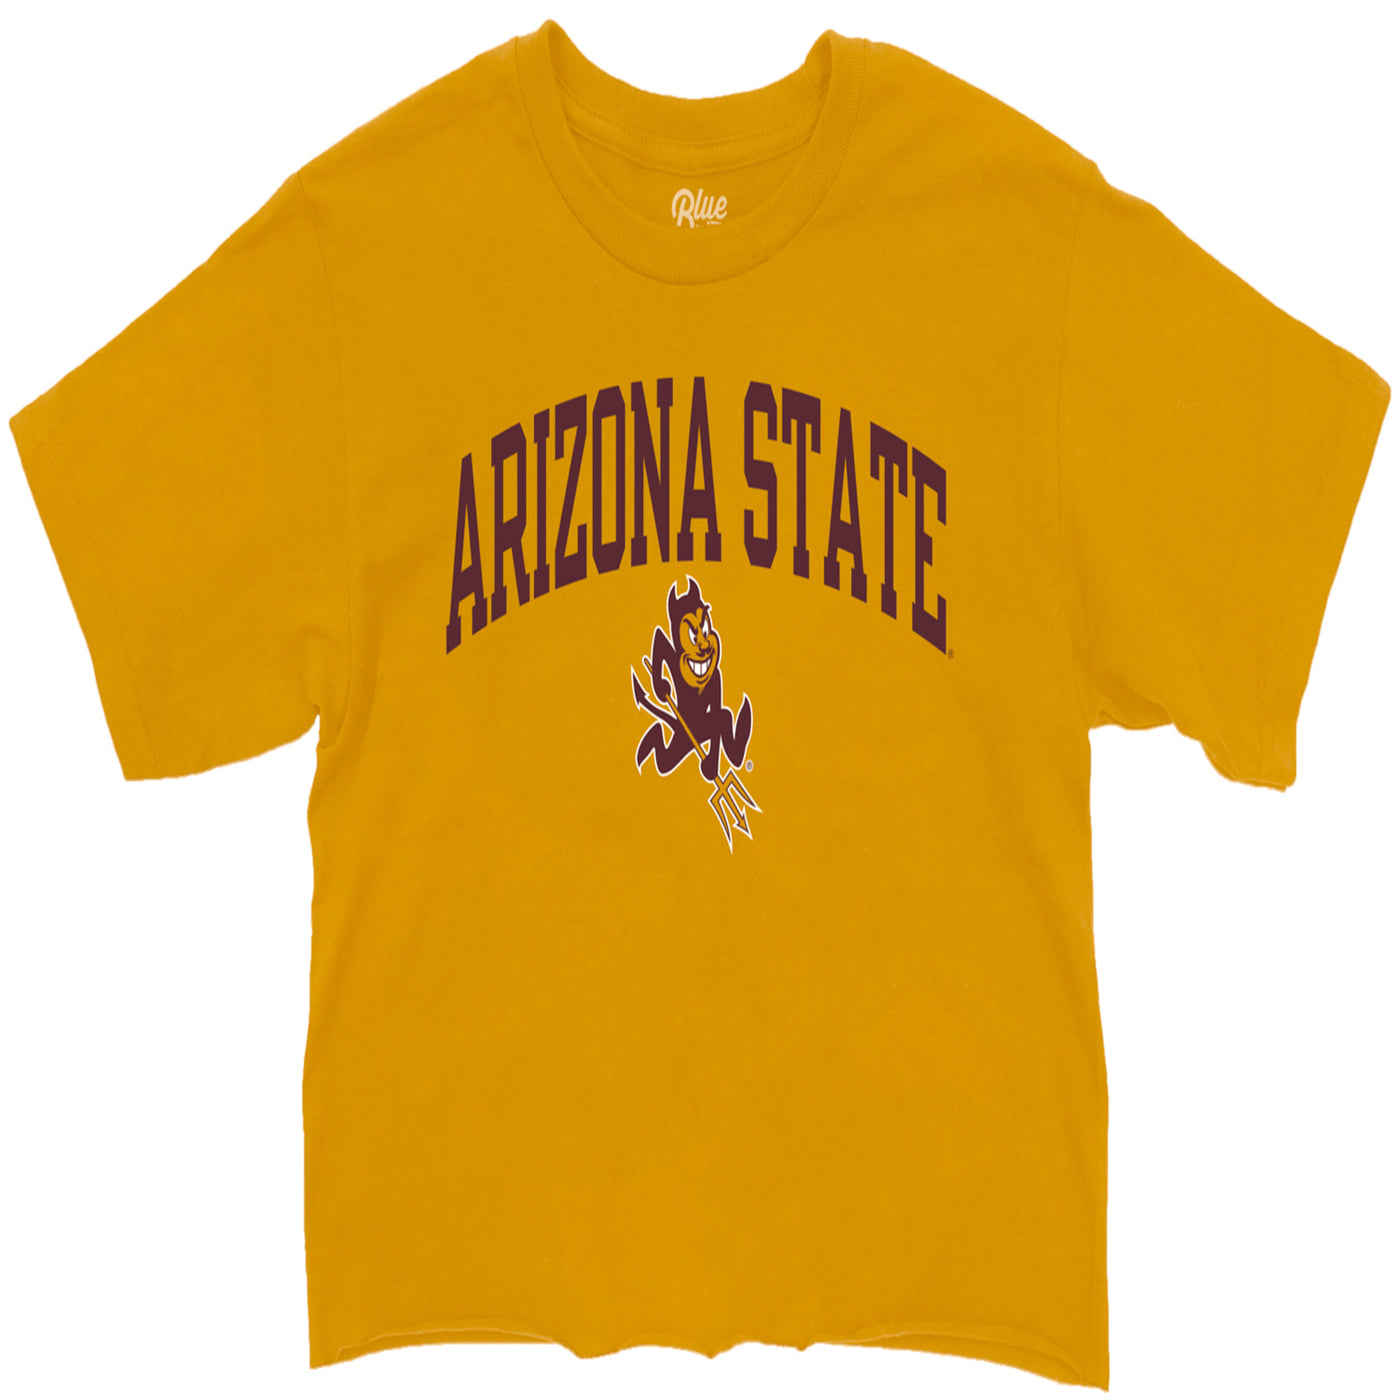 ASU gold crop tee with 'Arizona State' lettering arched over a Spakry